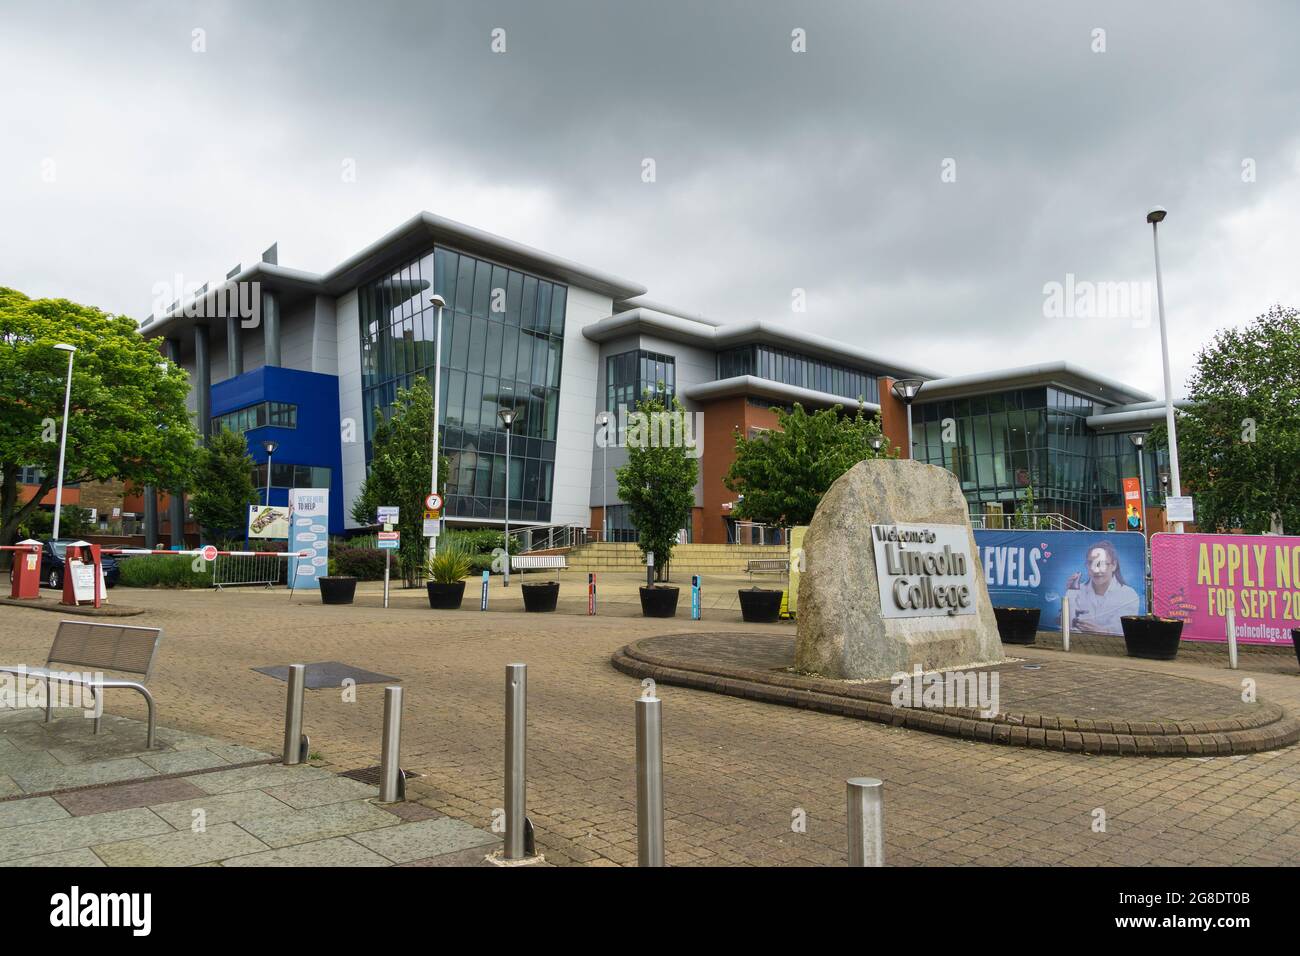 Lincoln College of further Education Monks Road Lincoln City Lincolnshire 2021 Stockfoto